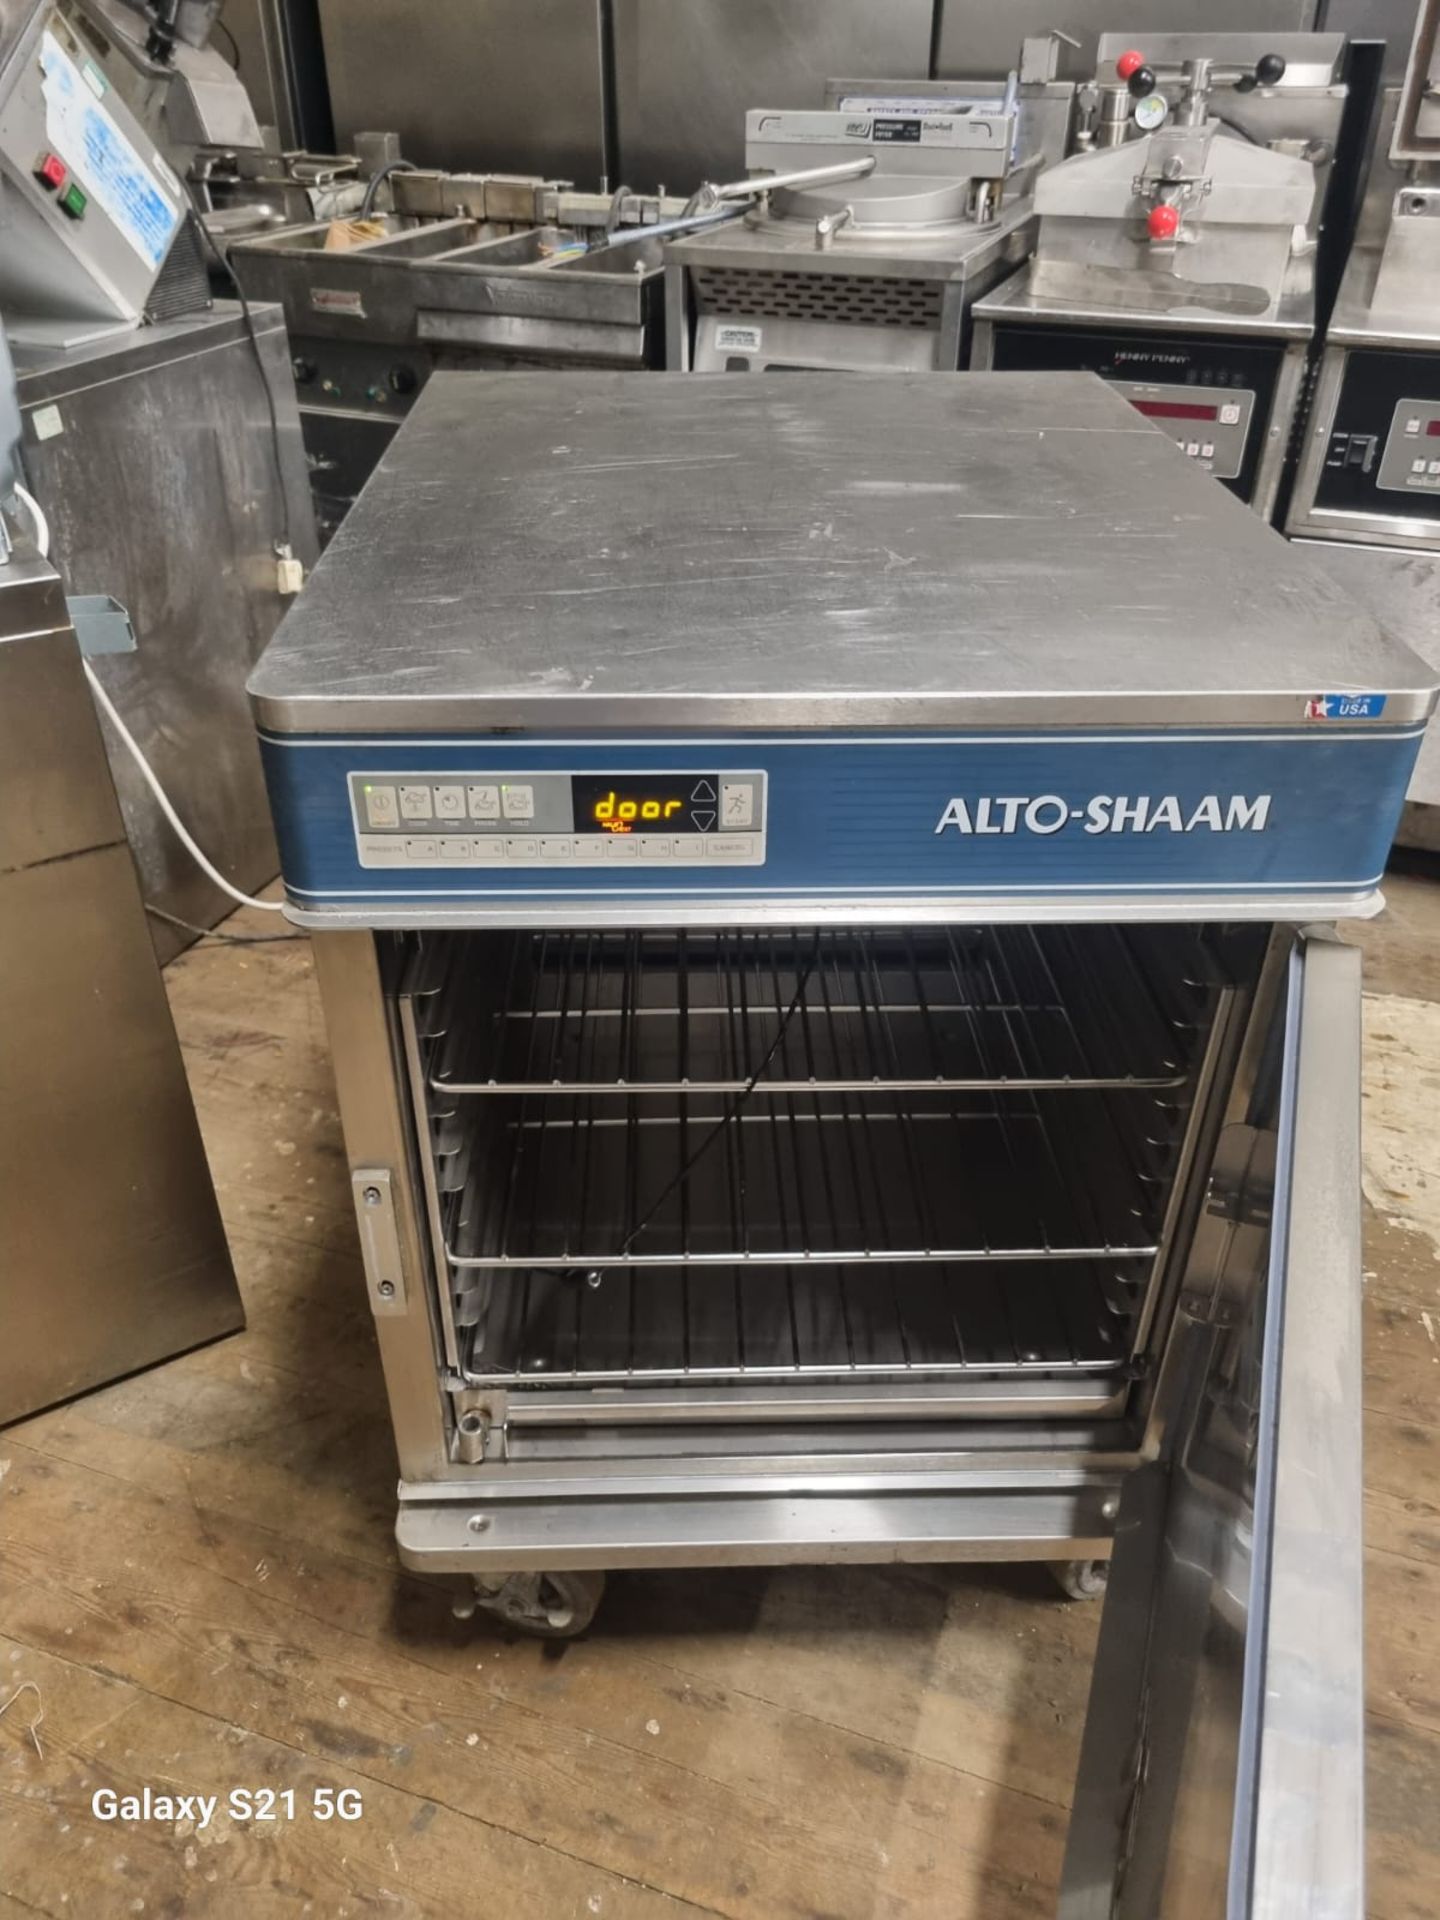 ALTO SHAAM 750-TH-Iii COOK AND HOLD - NEVER BEEN USED - 13 AMP PLUG  - Bild 2 aus 7